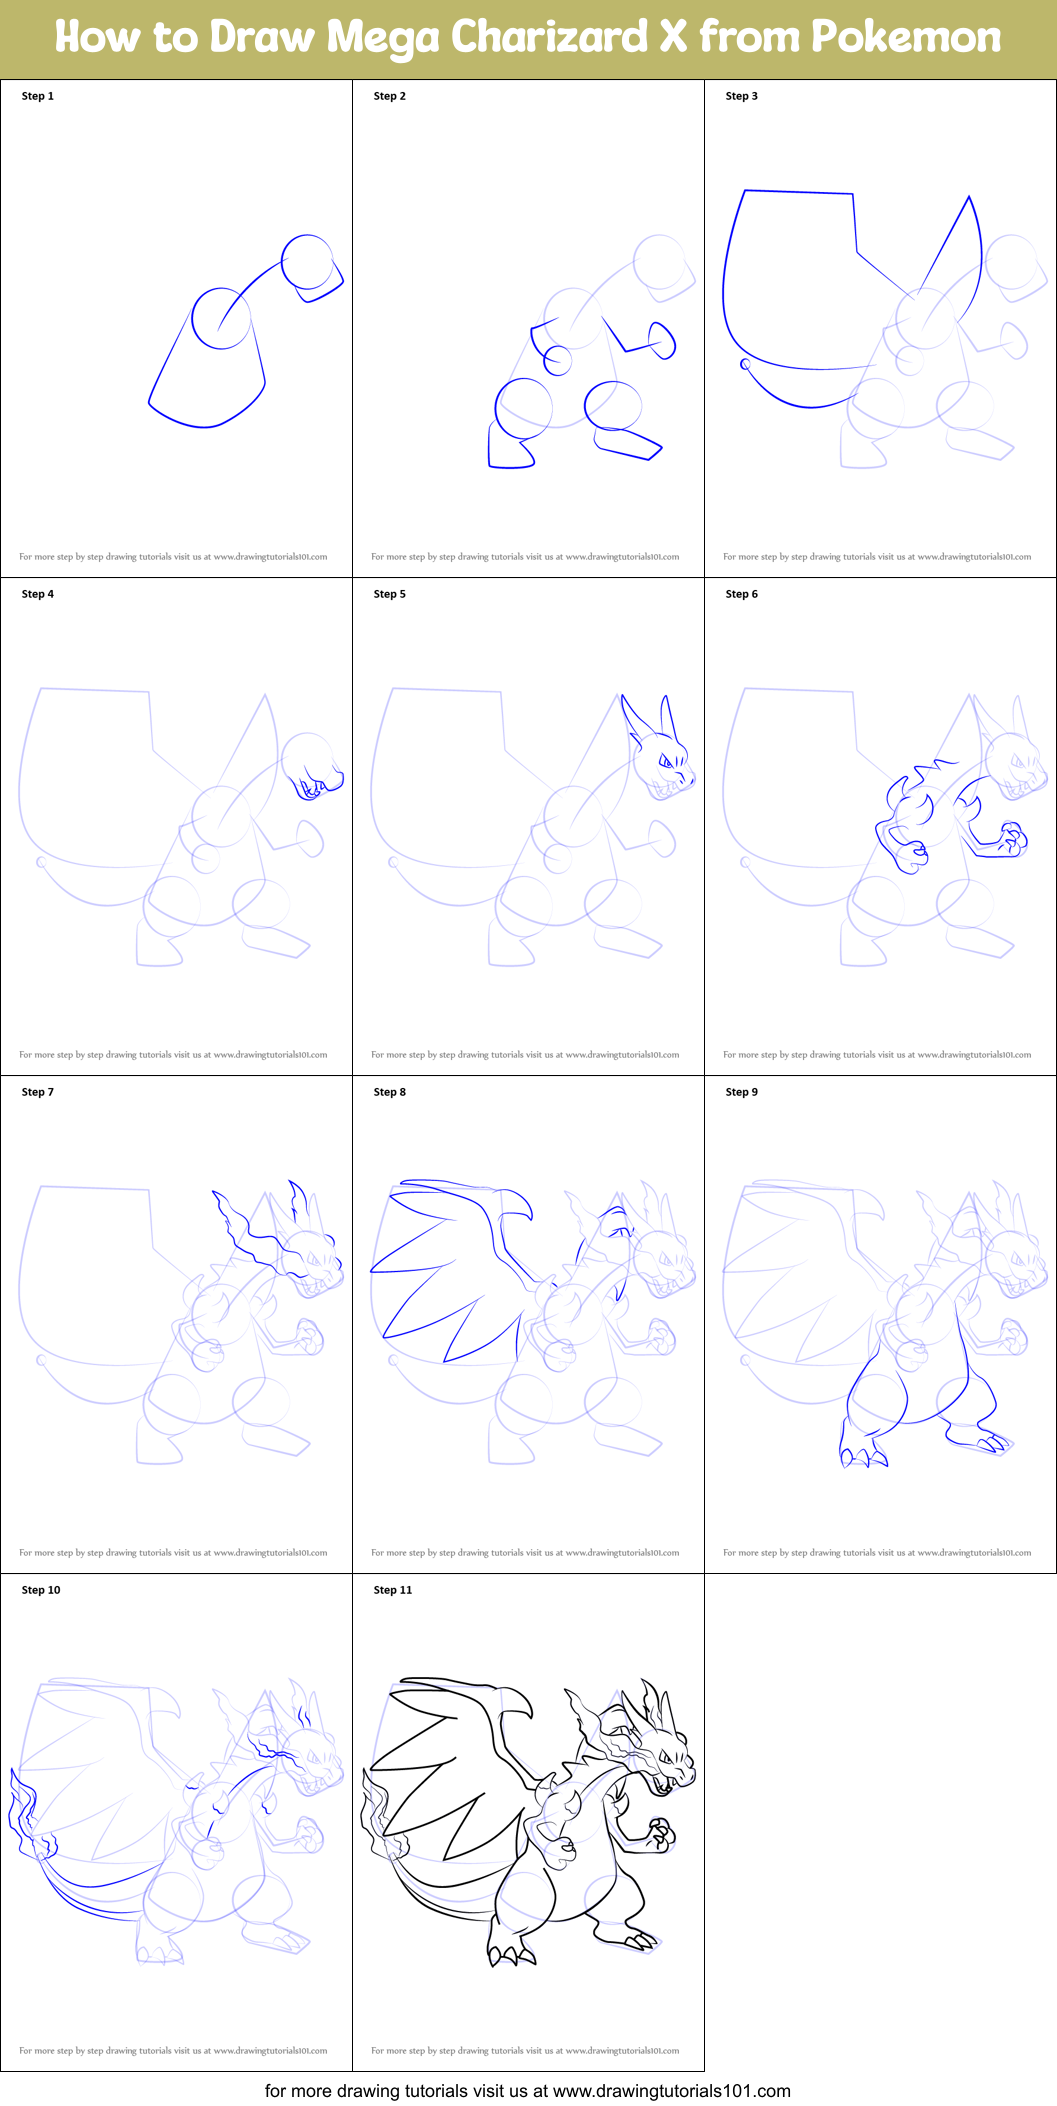 how to draw mega charizard x from pokemon printable step by step drawing sheet drawingtutorials101 com